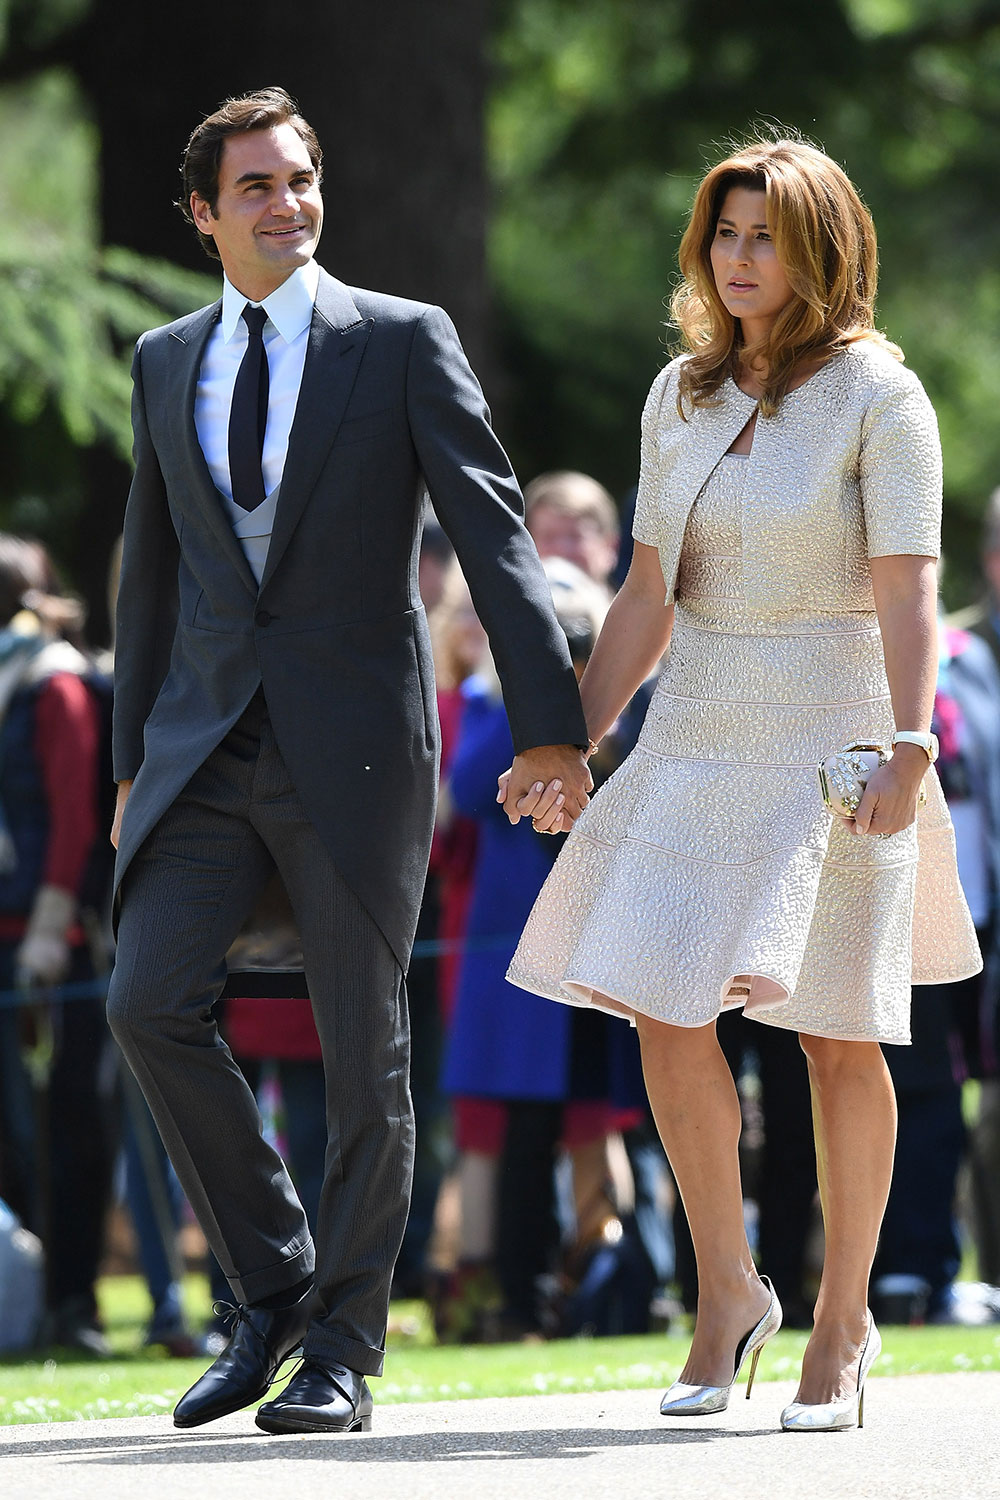 Tennis star Roger Federer and wife Mirka.